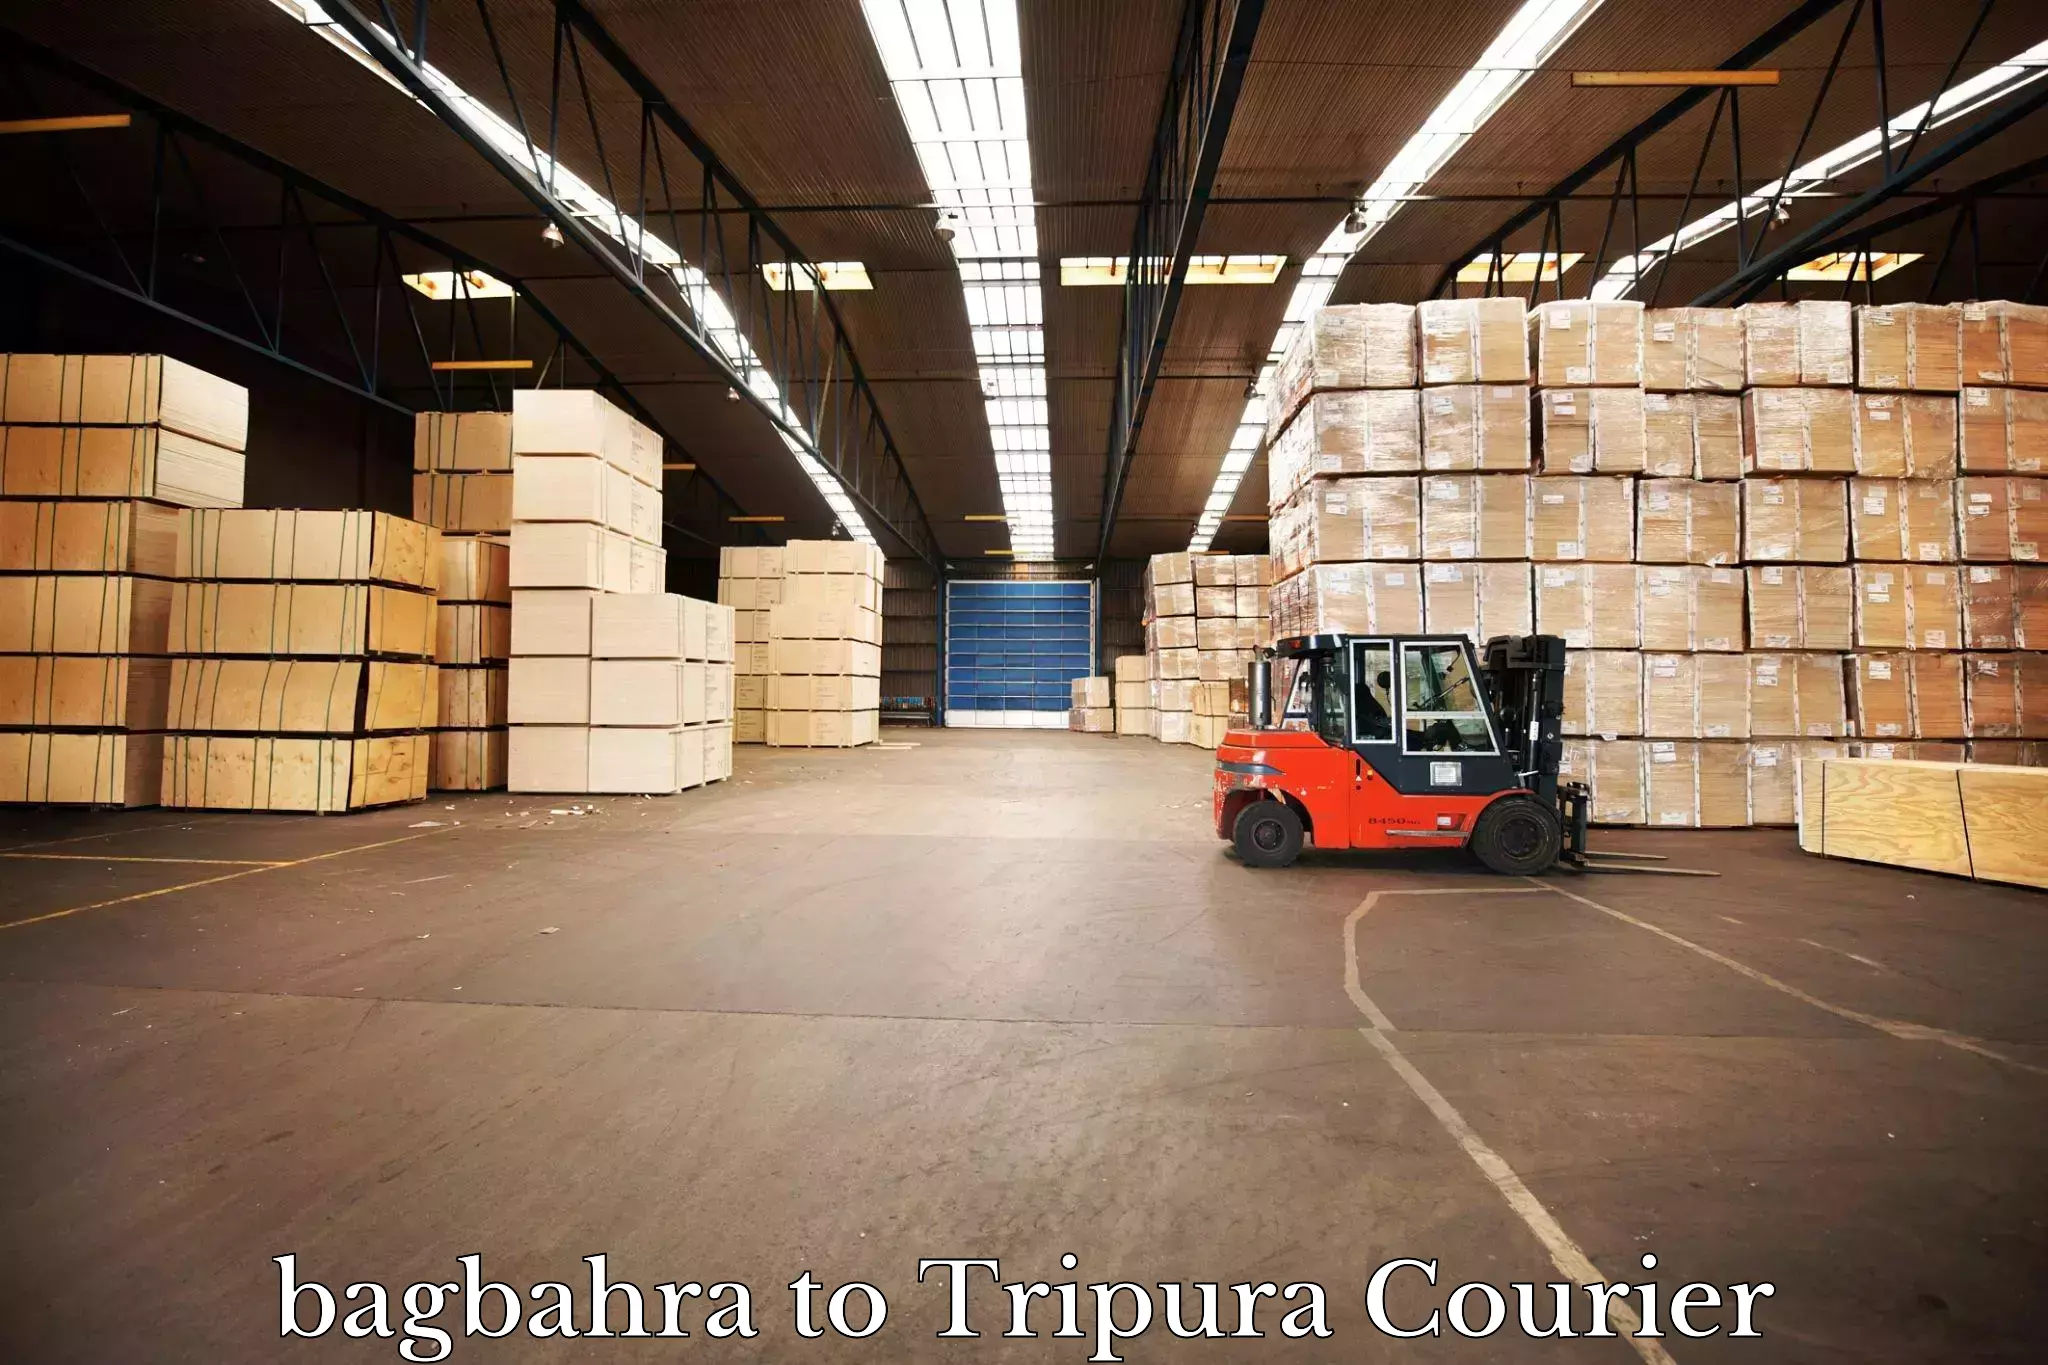 Courier service efficiency in bagbahra to Khowai